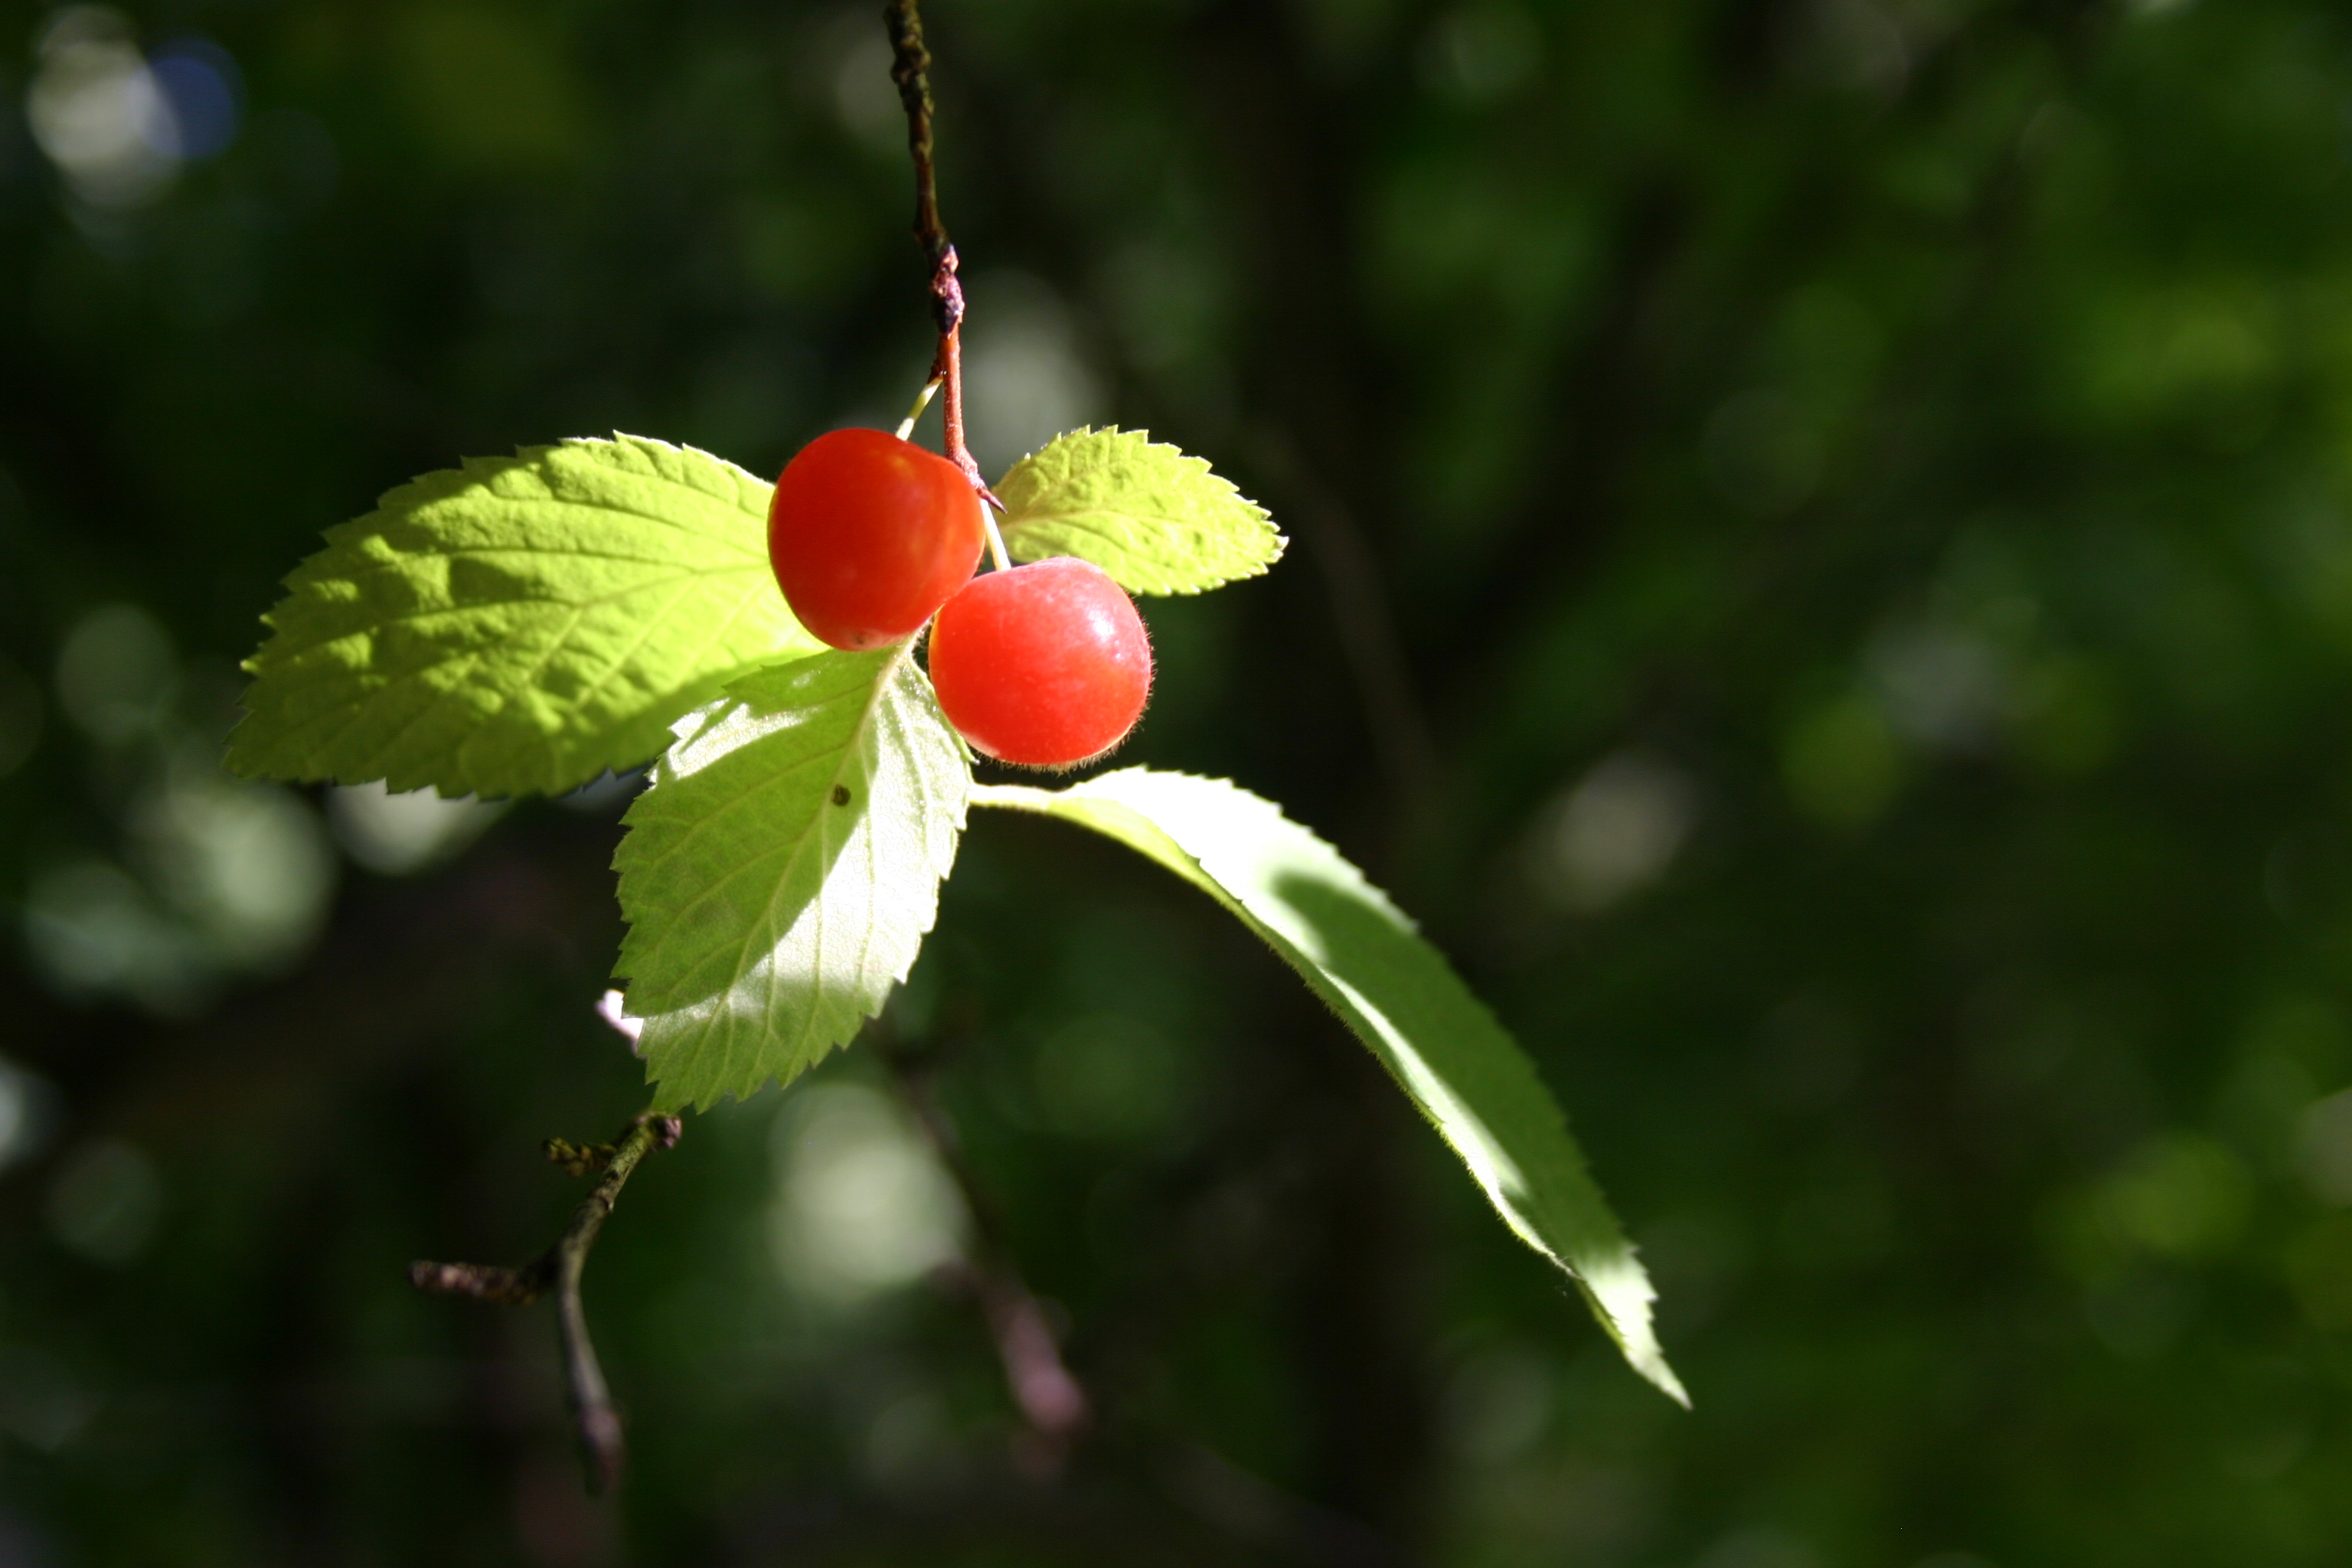 Red berries and green leaves.